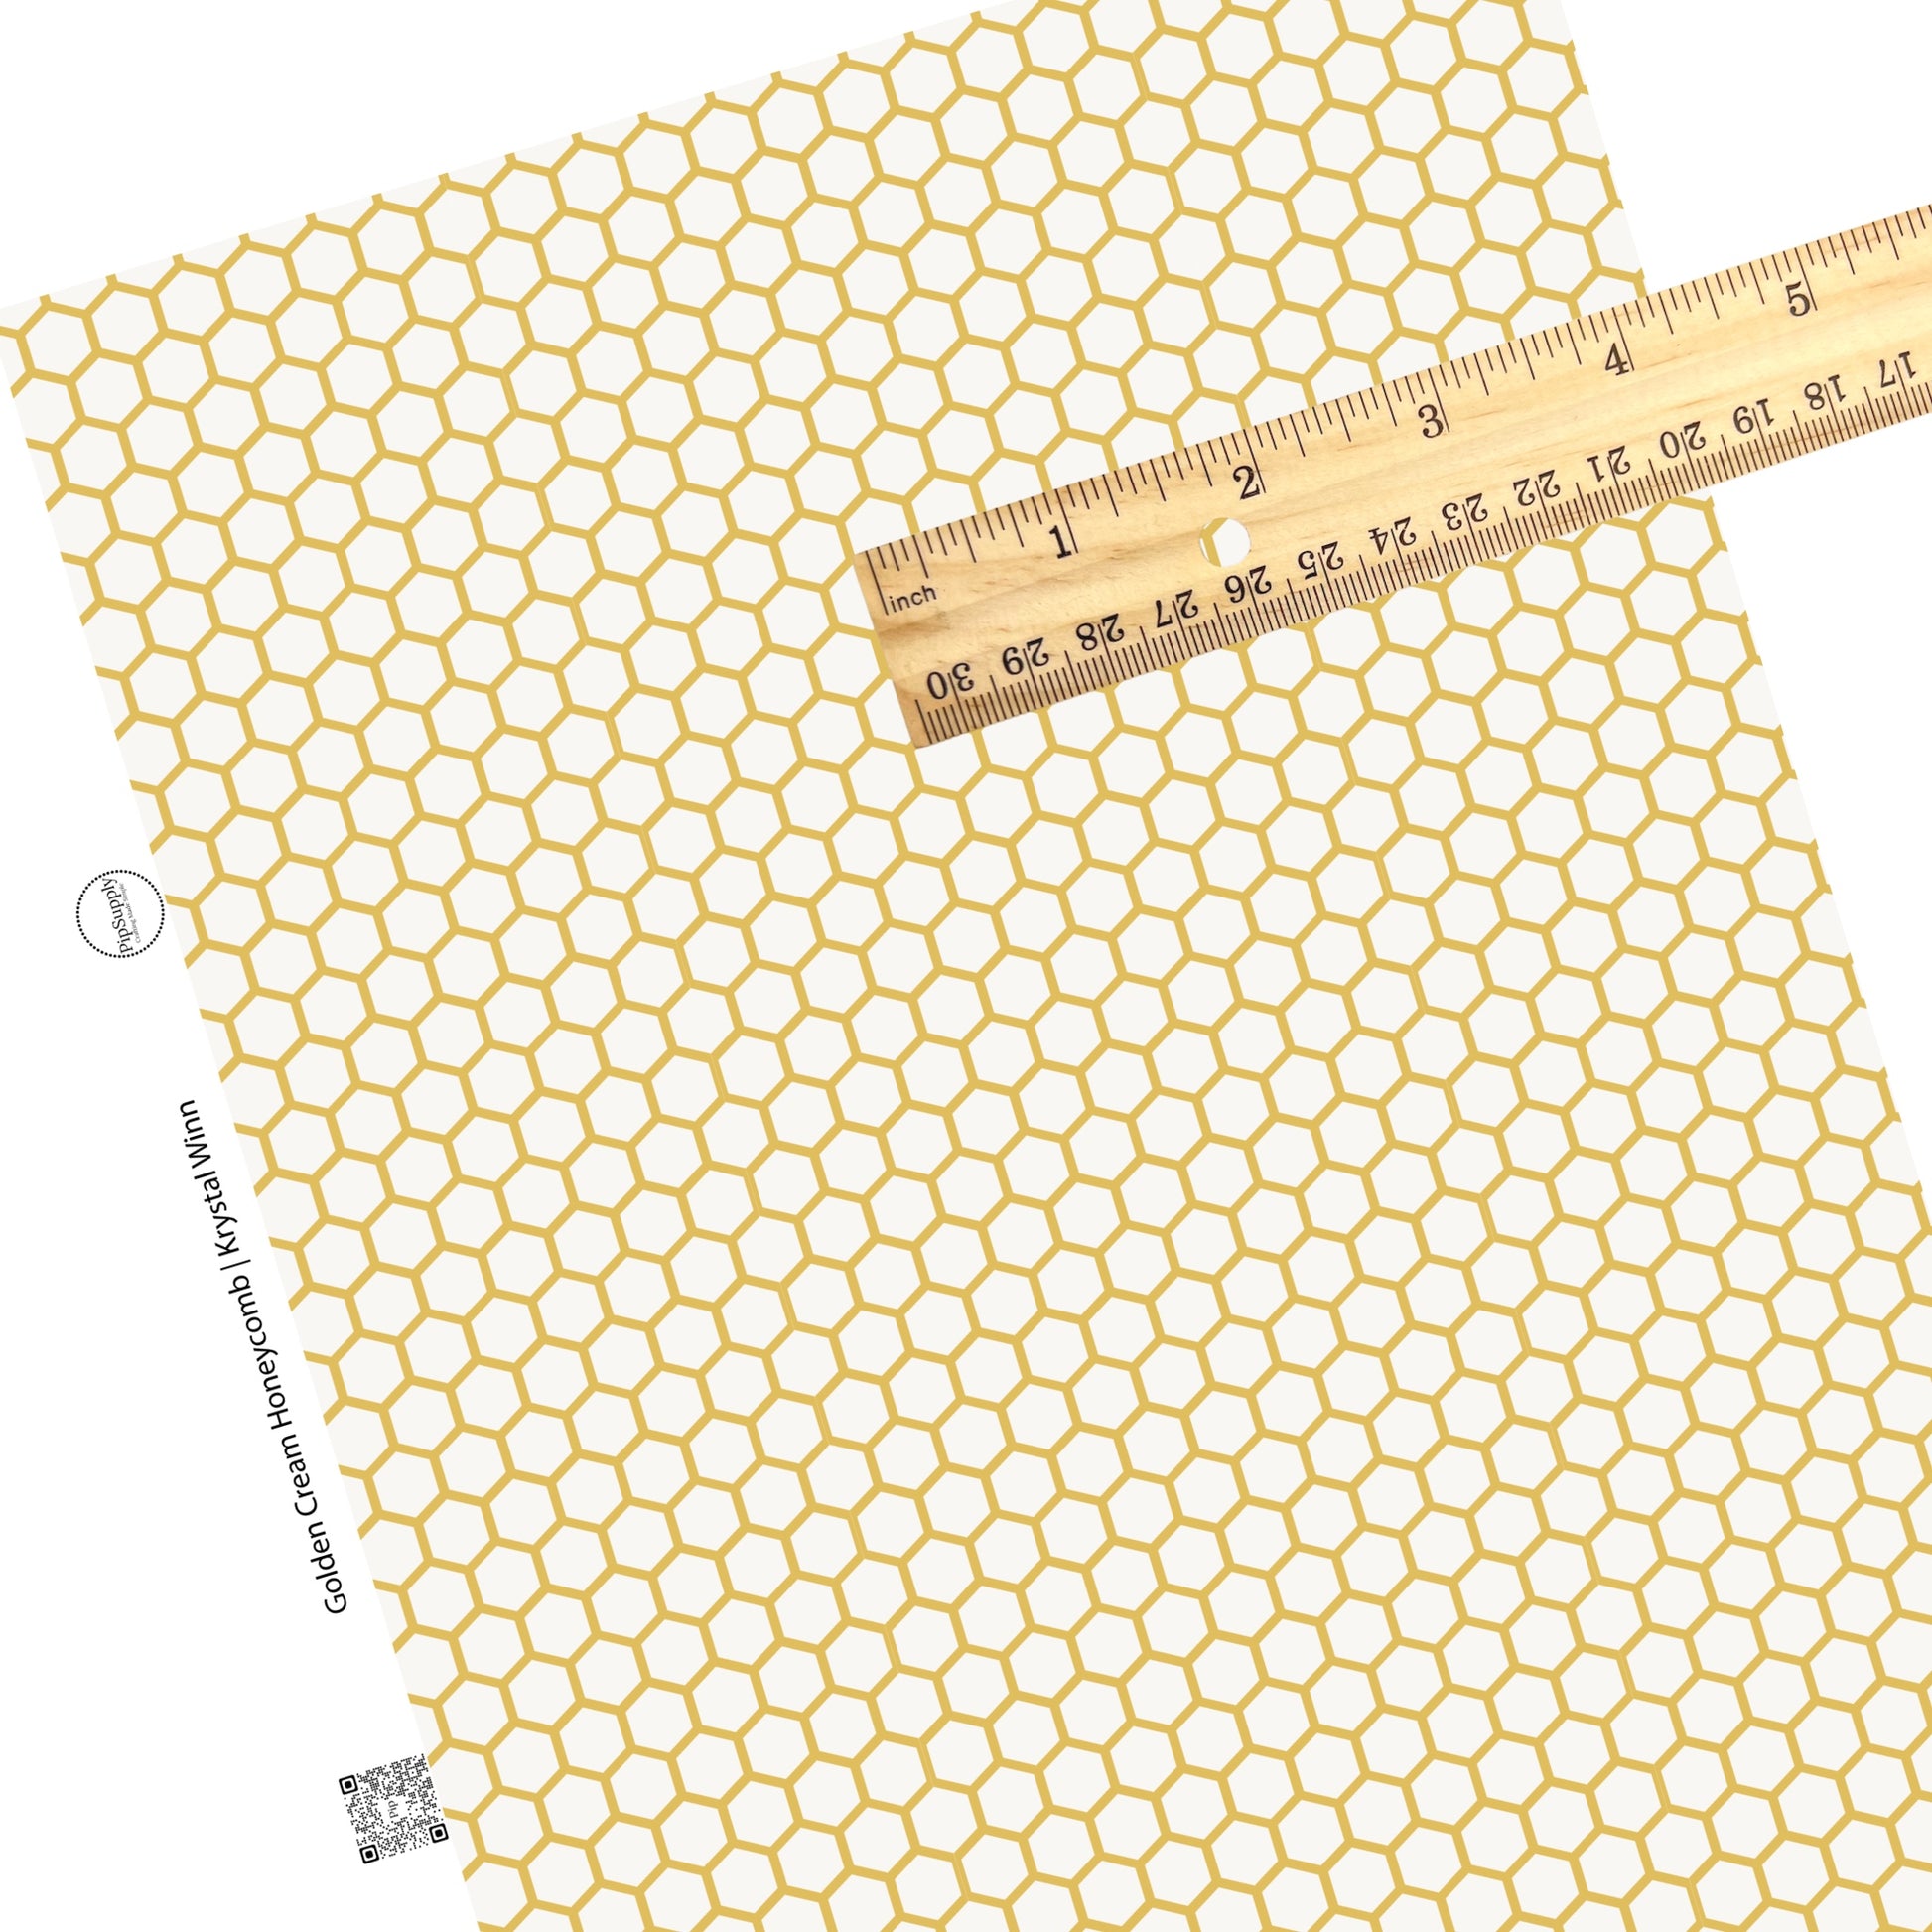 Repeating gold hexagon pattern on a cream faux leather sheet